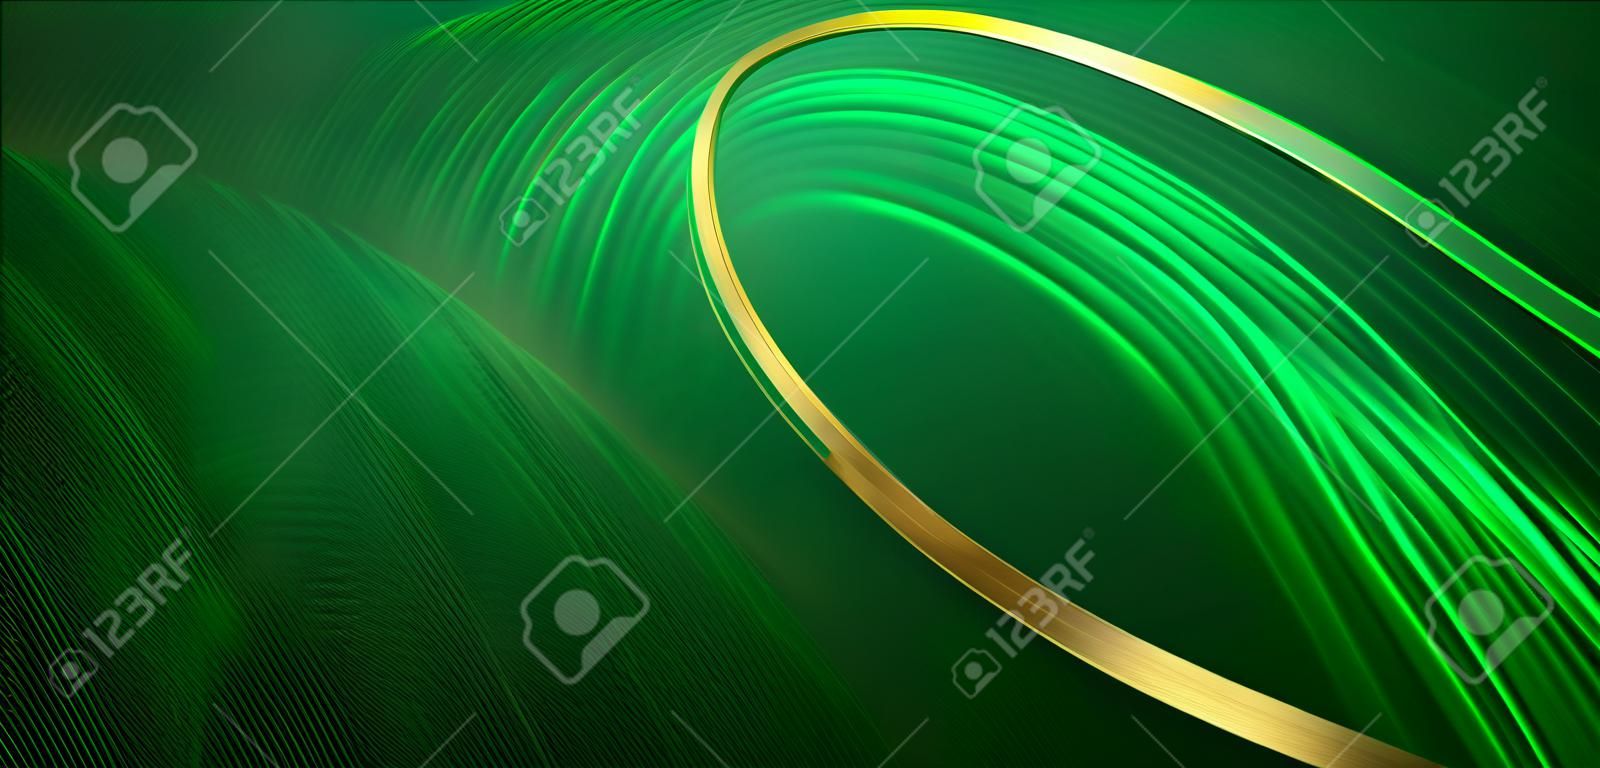 Abstract 3d gold curved green ribbon on dark green background with lighting effect and sparkle with copy space for text. Luxury design style. Vector illustration